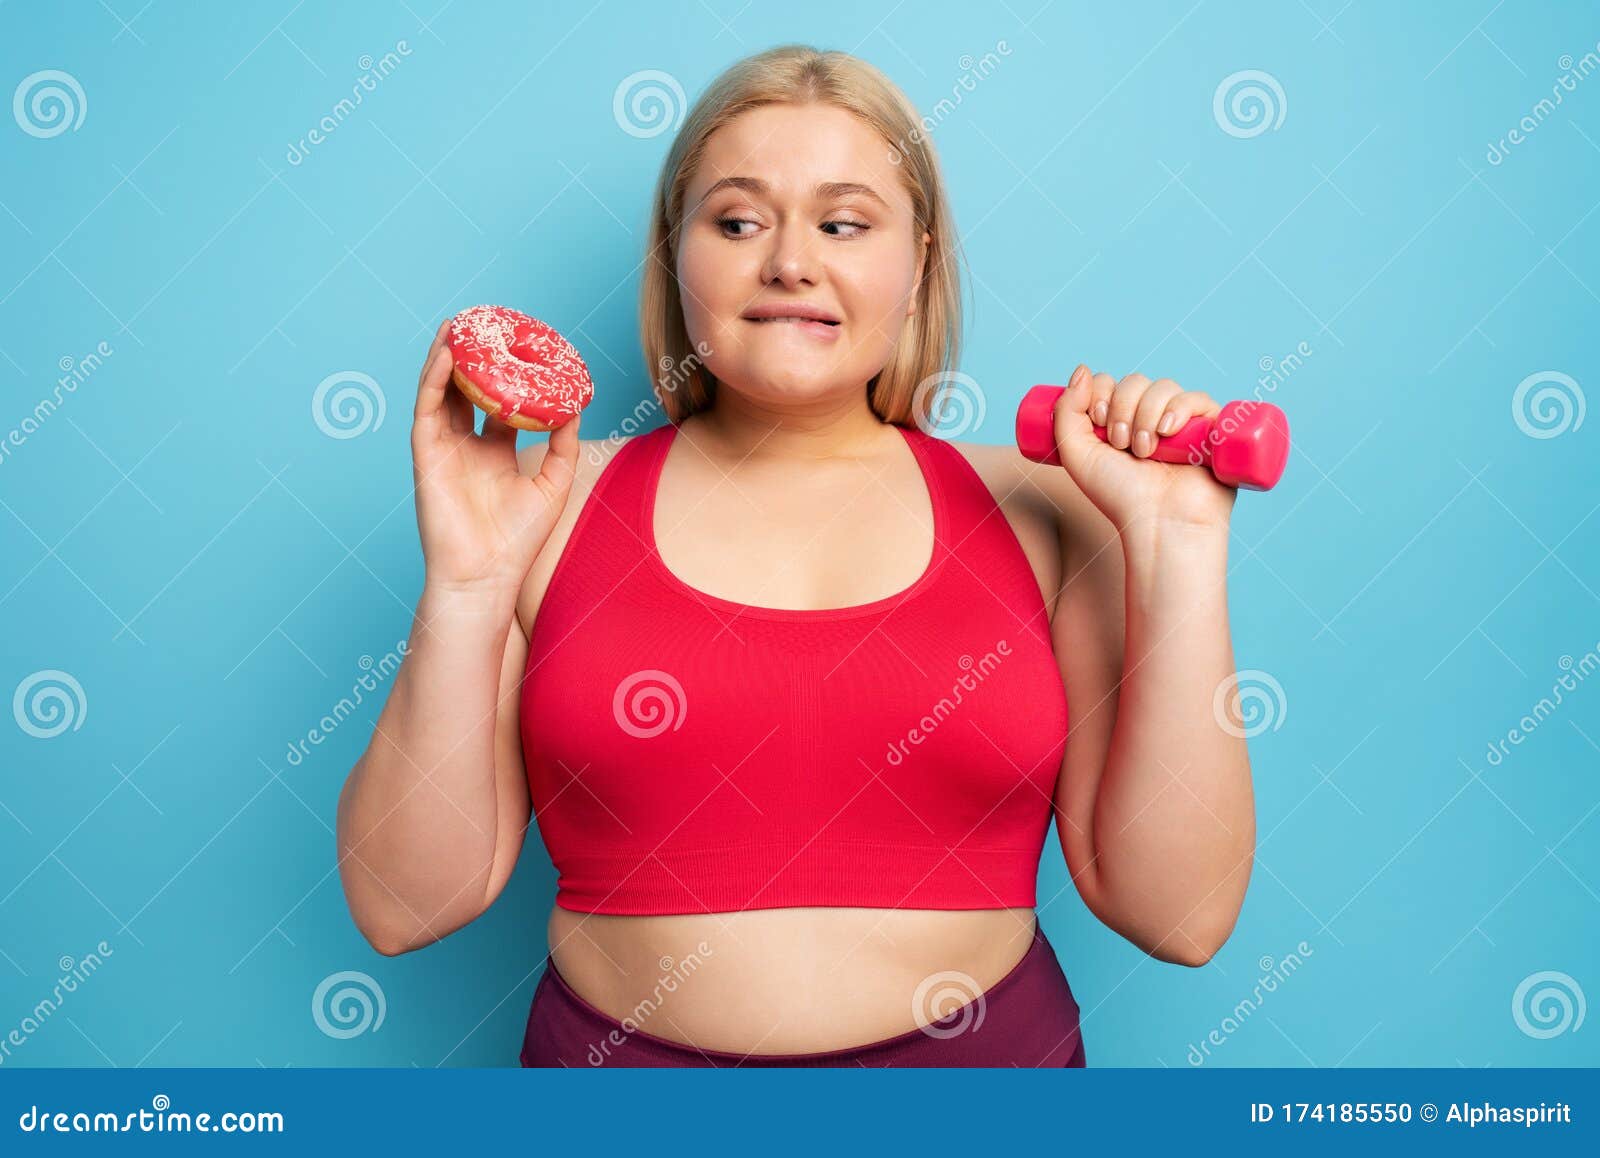 Fat Girl Thinks To Eat Donuts instead of Does Gym. Concept of ...